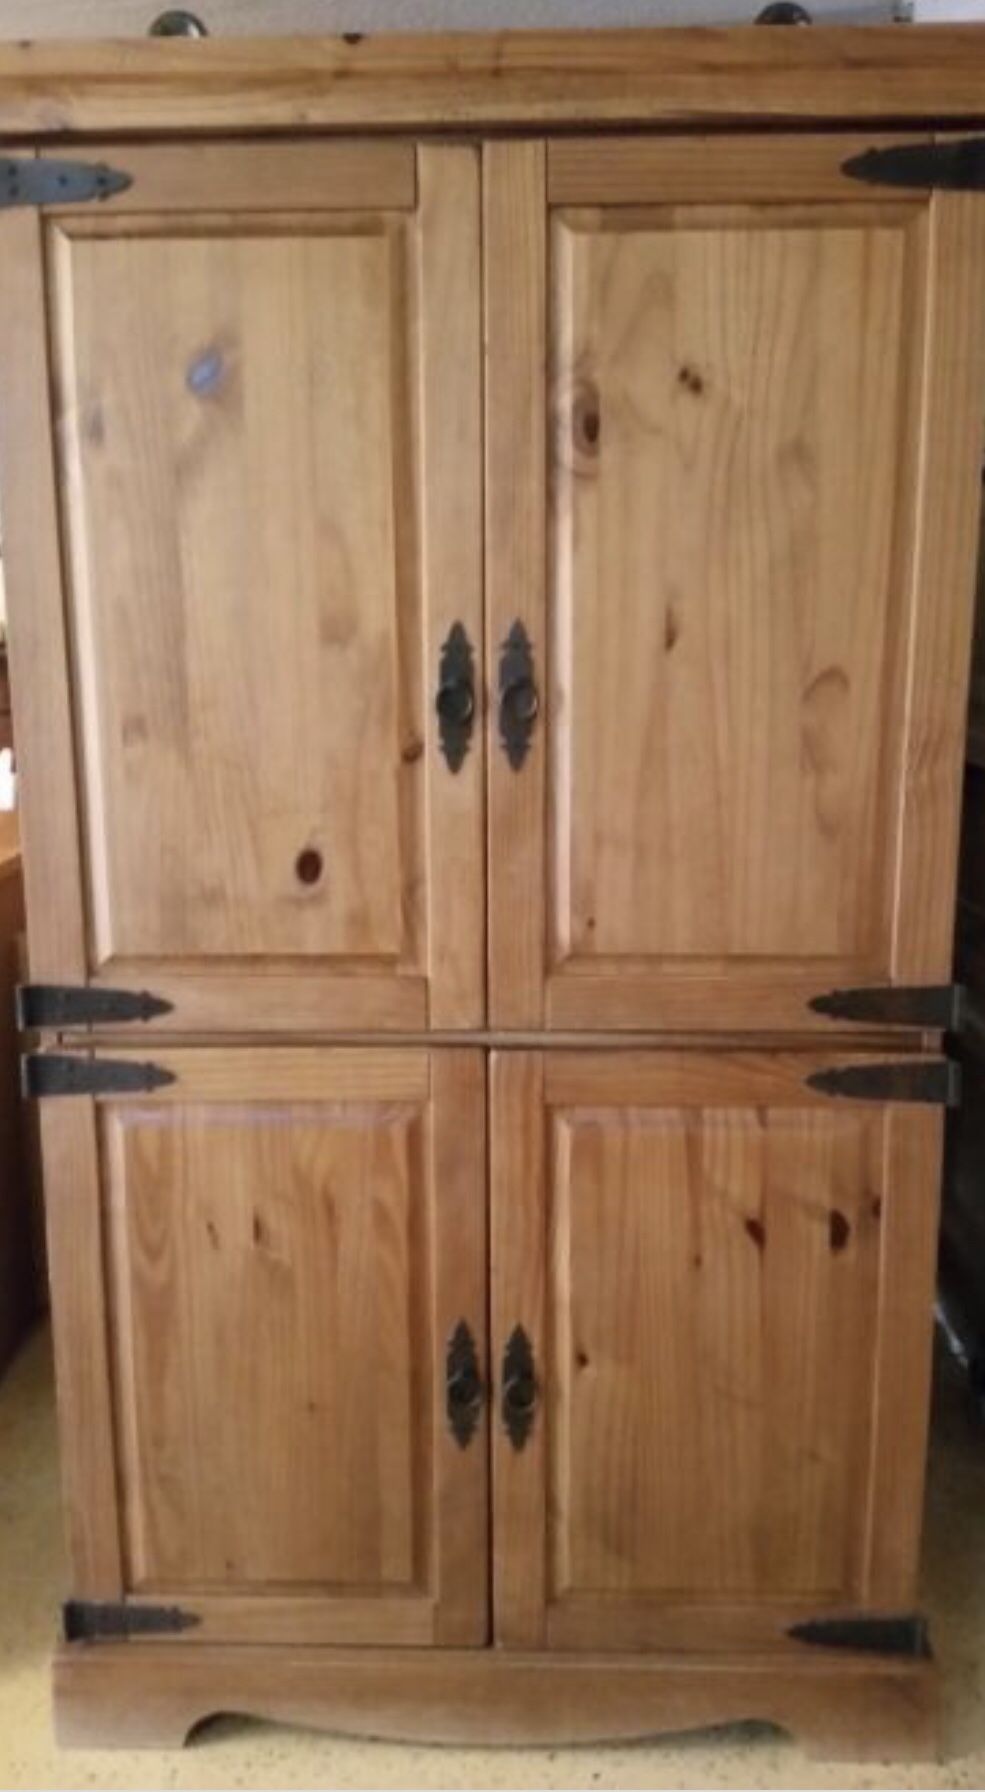 Pier 1 Imports Rustic Pine Armoire TV Media or Desk Cabinet